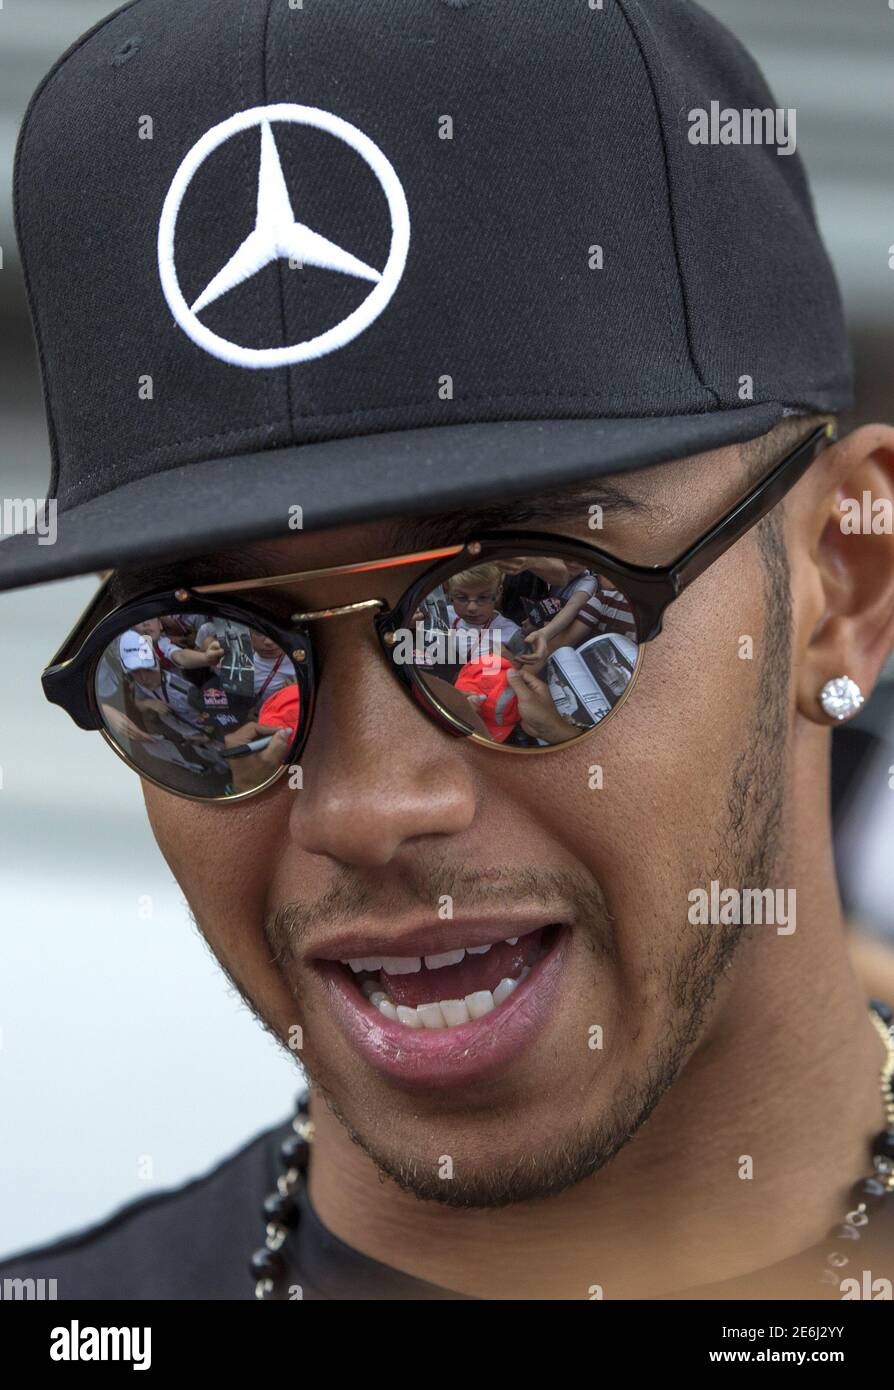 Fans of Mercedes Formula One driver Lewis Hamilton of Britain are seen  reflected in his sunglasses while signing autographs ahead of the weekend's  Belgian F1 Grand Prix in Spa-Francorchamps, Belgium, August 20,